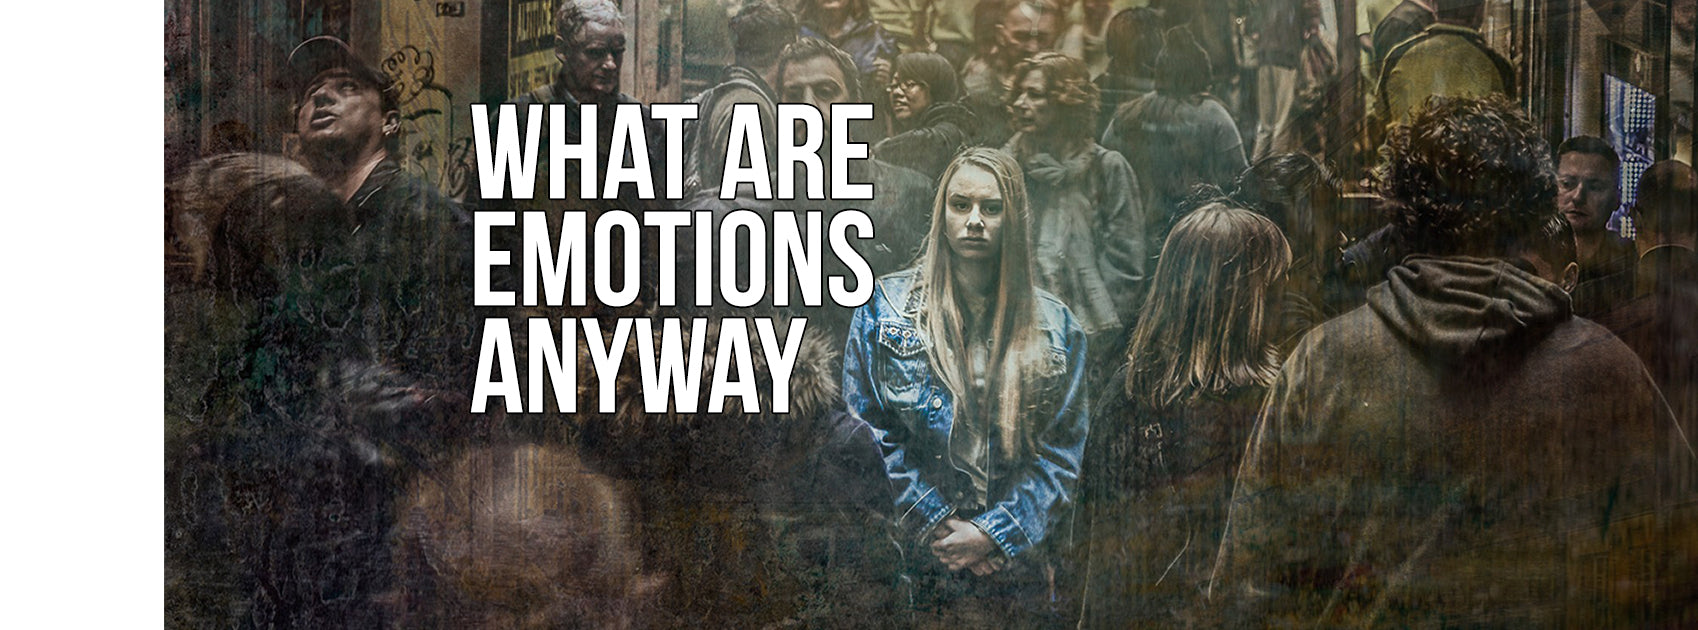 What Are Emotions Anyway?